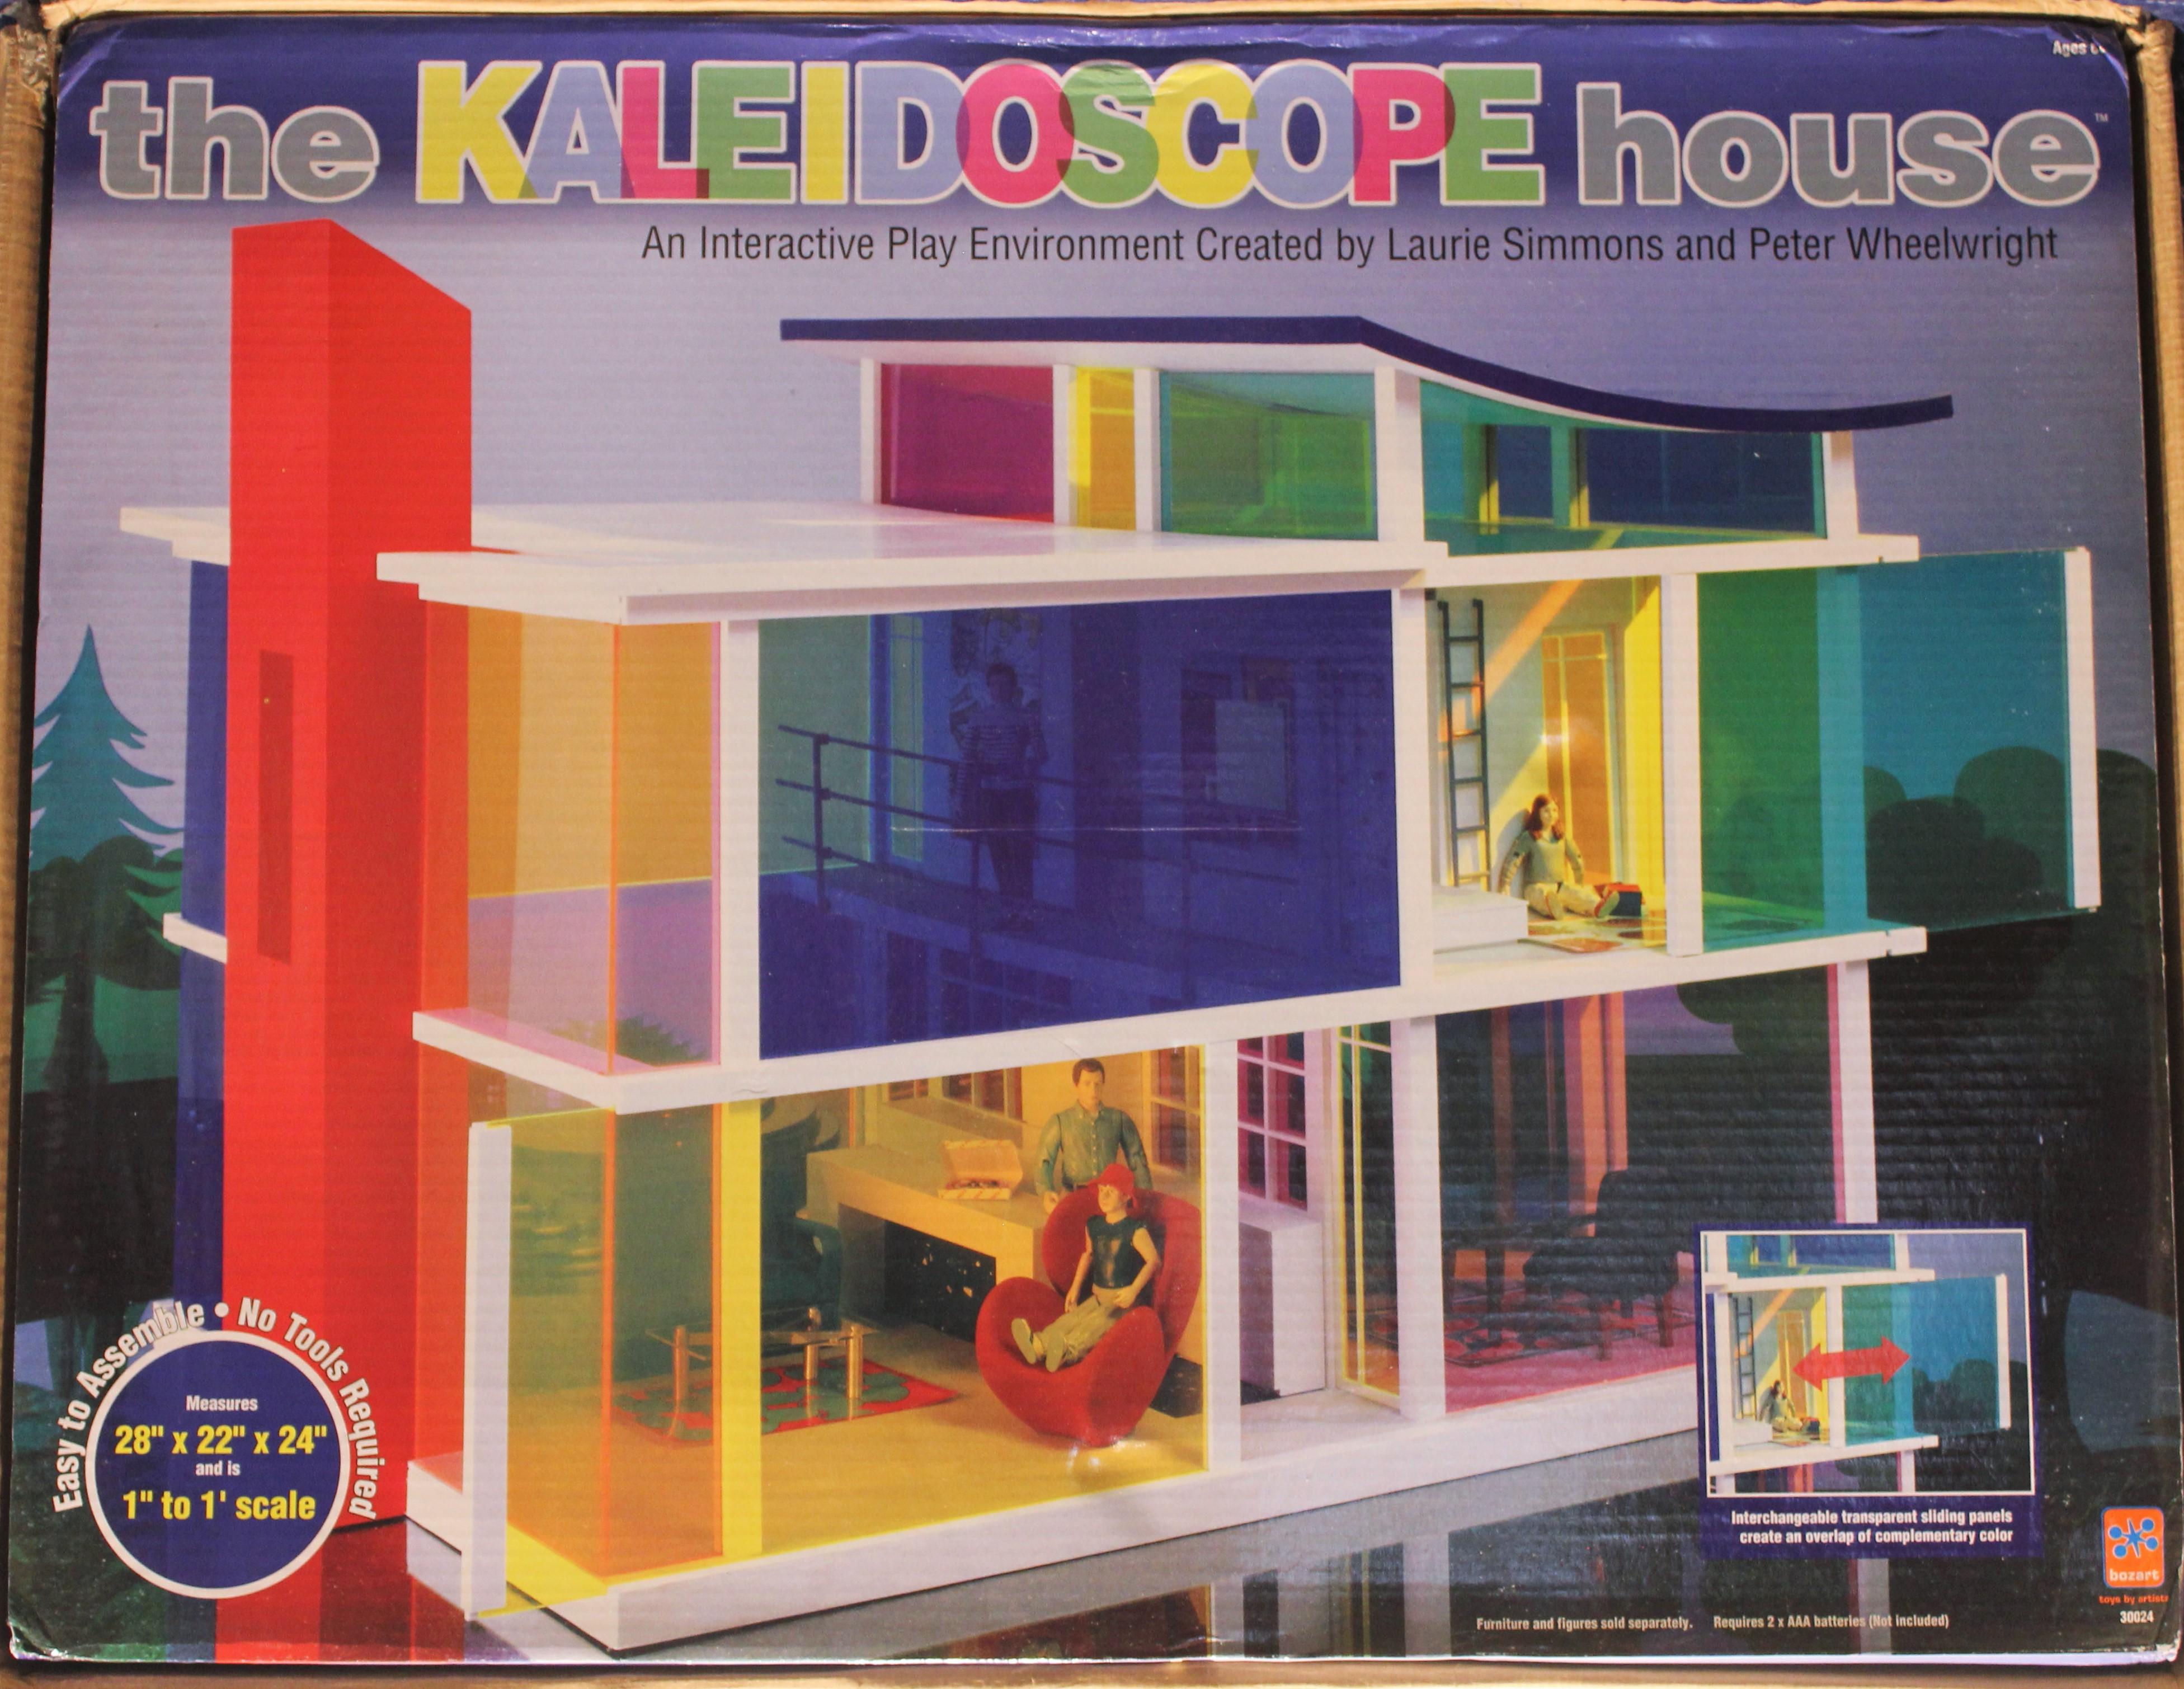 Unopened set of the Kaleidoscope house with opened living room set, unopened bathroom, dining room, bedroom, and art collection #1. 

The Kaleidoscope House, a collaborative project with Bozart Toys which produces toys with leading contemporary